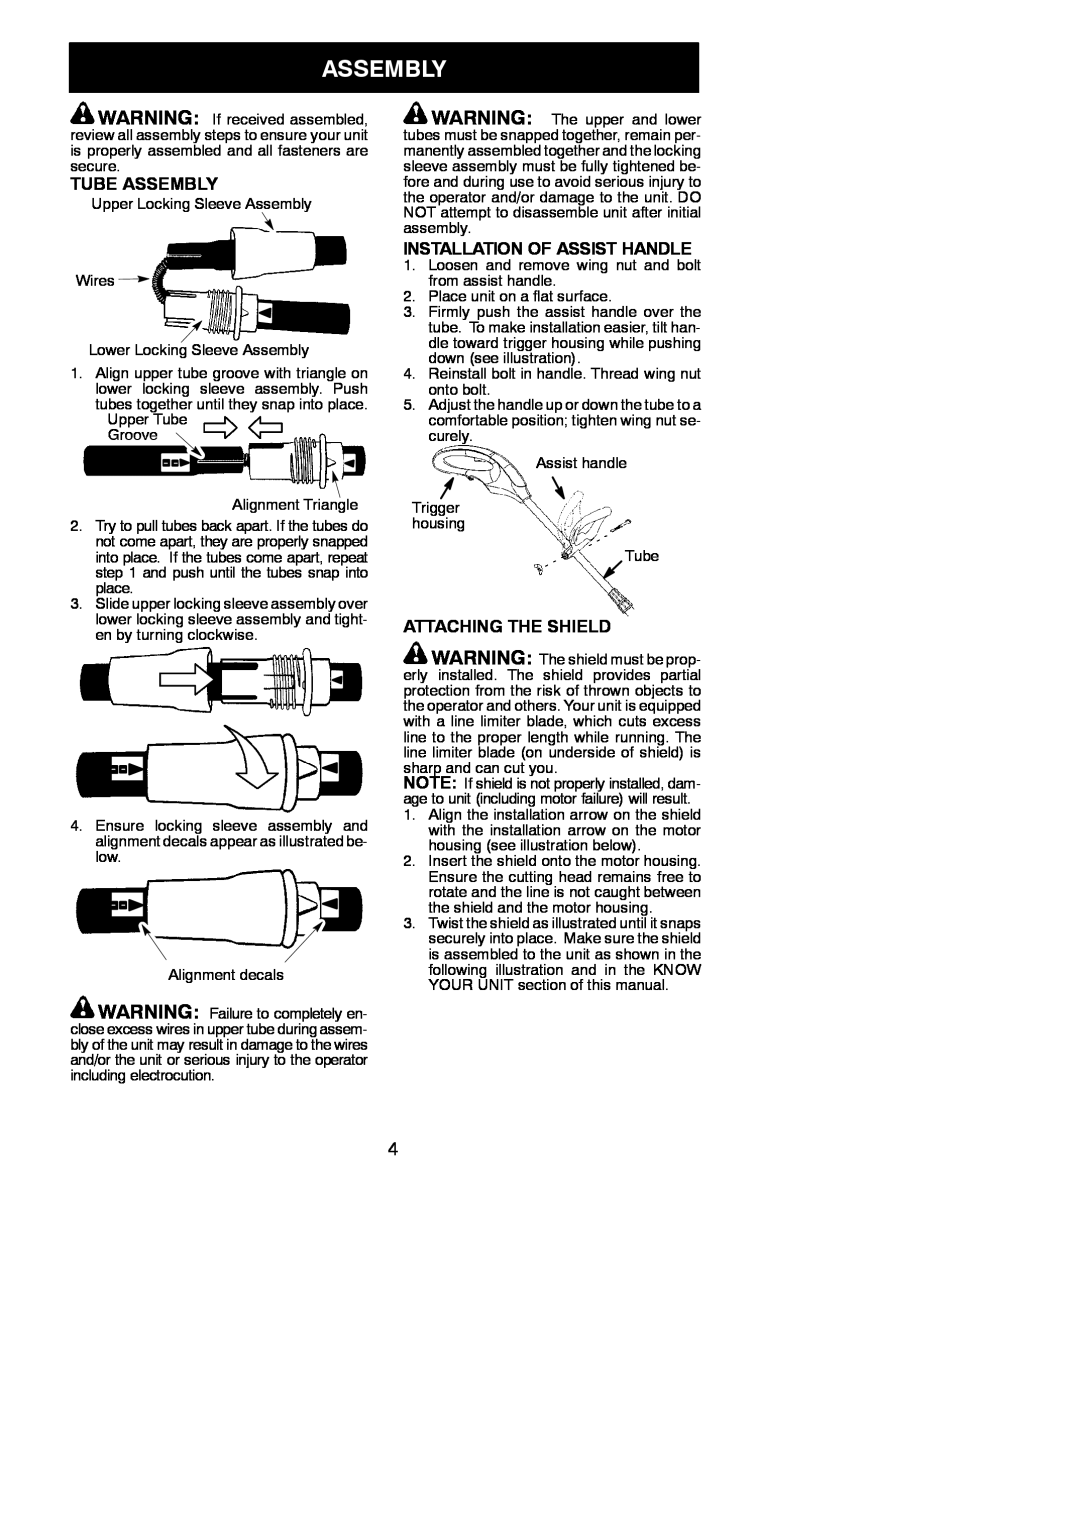 Weed Eater 952711865 instruction manual Tube Assembly, Installation Of Assist Handle, Attaching The Shield 